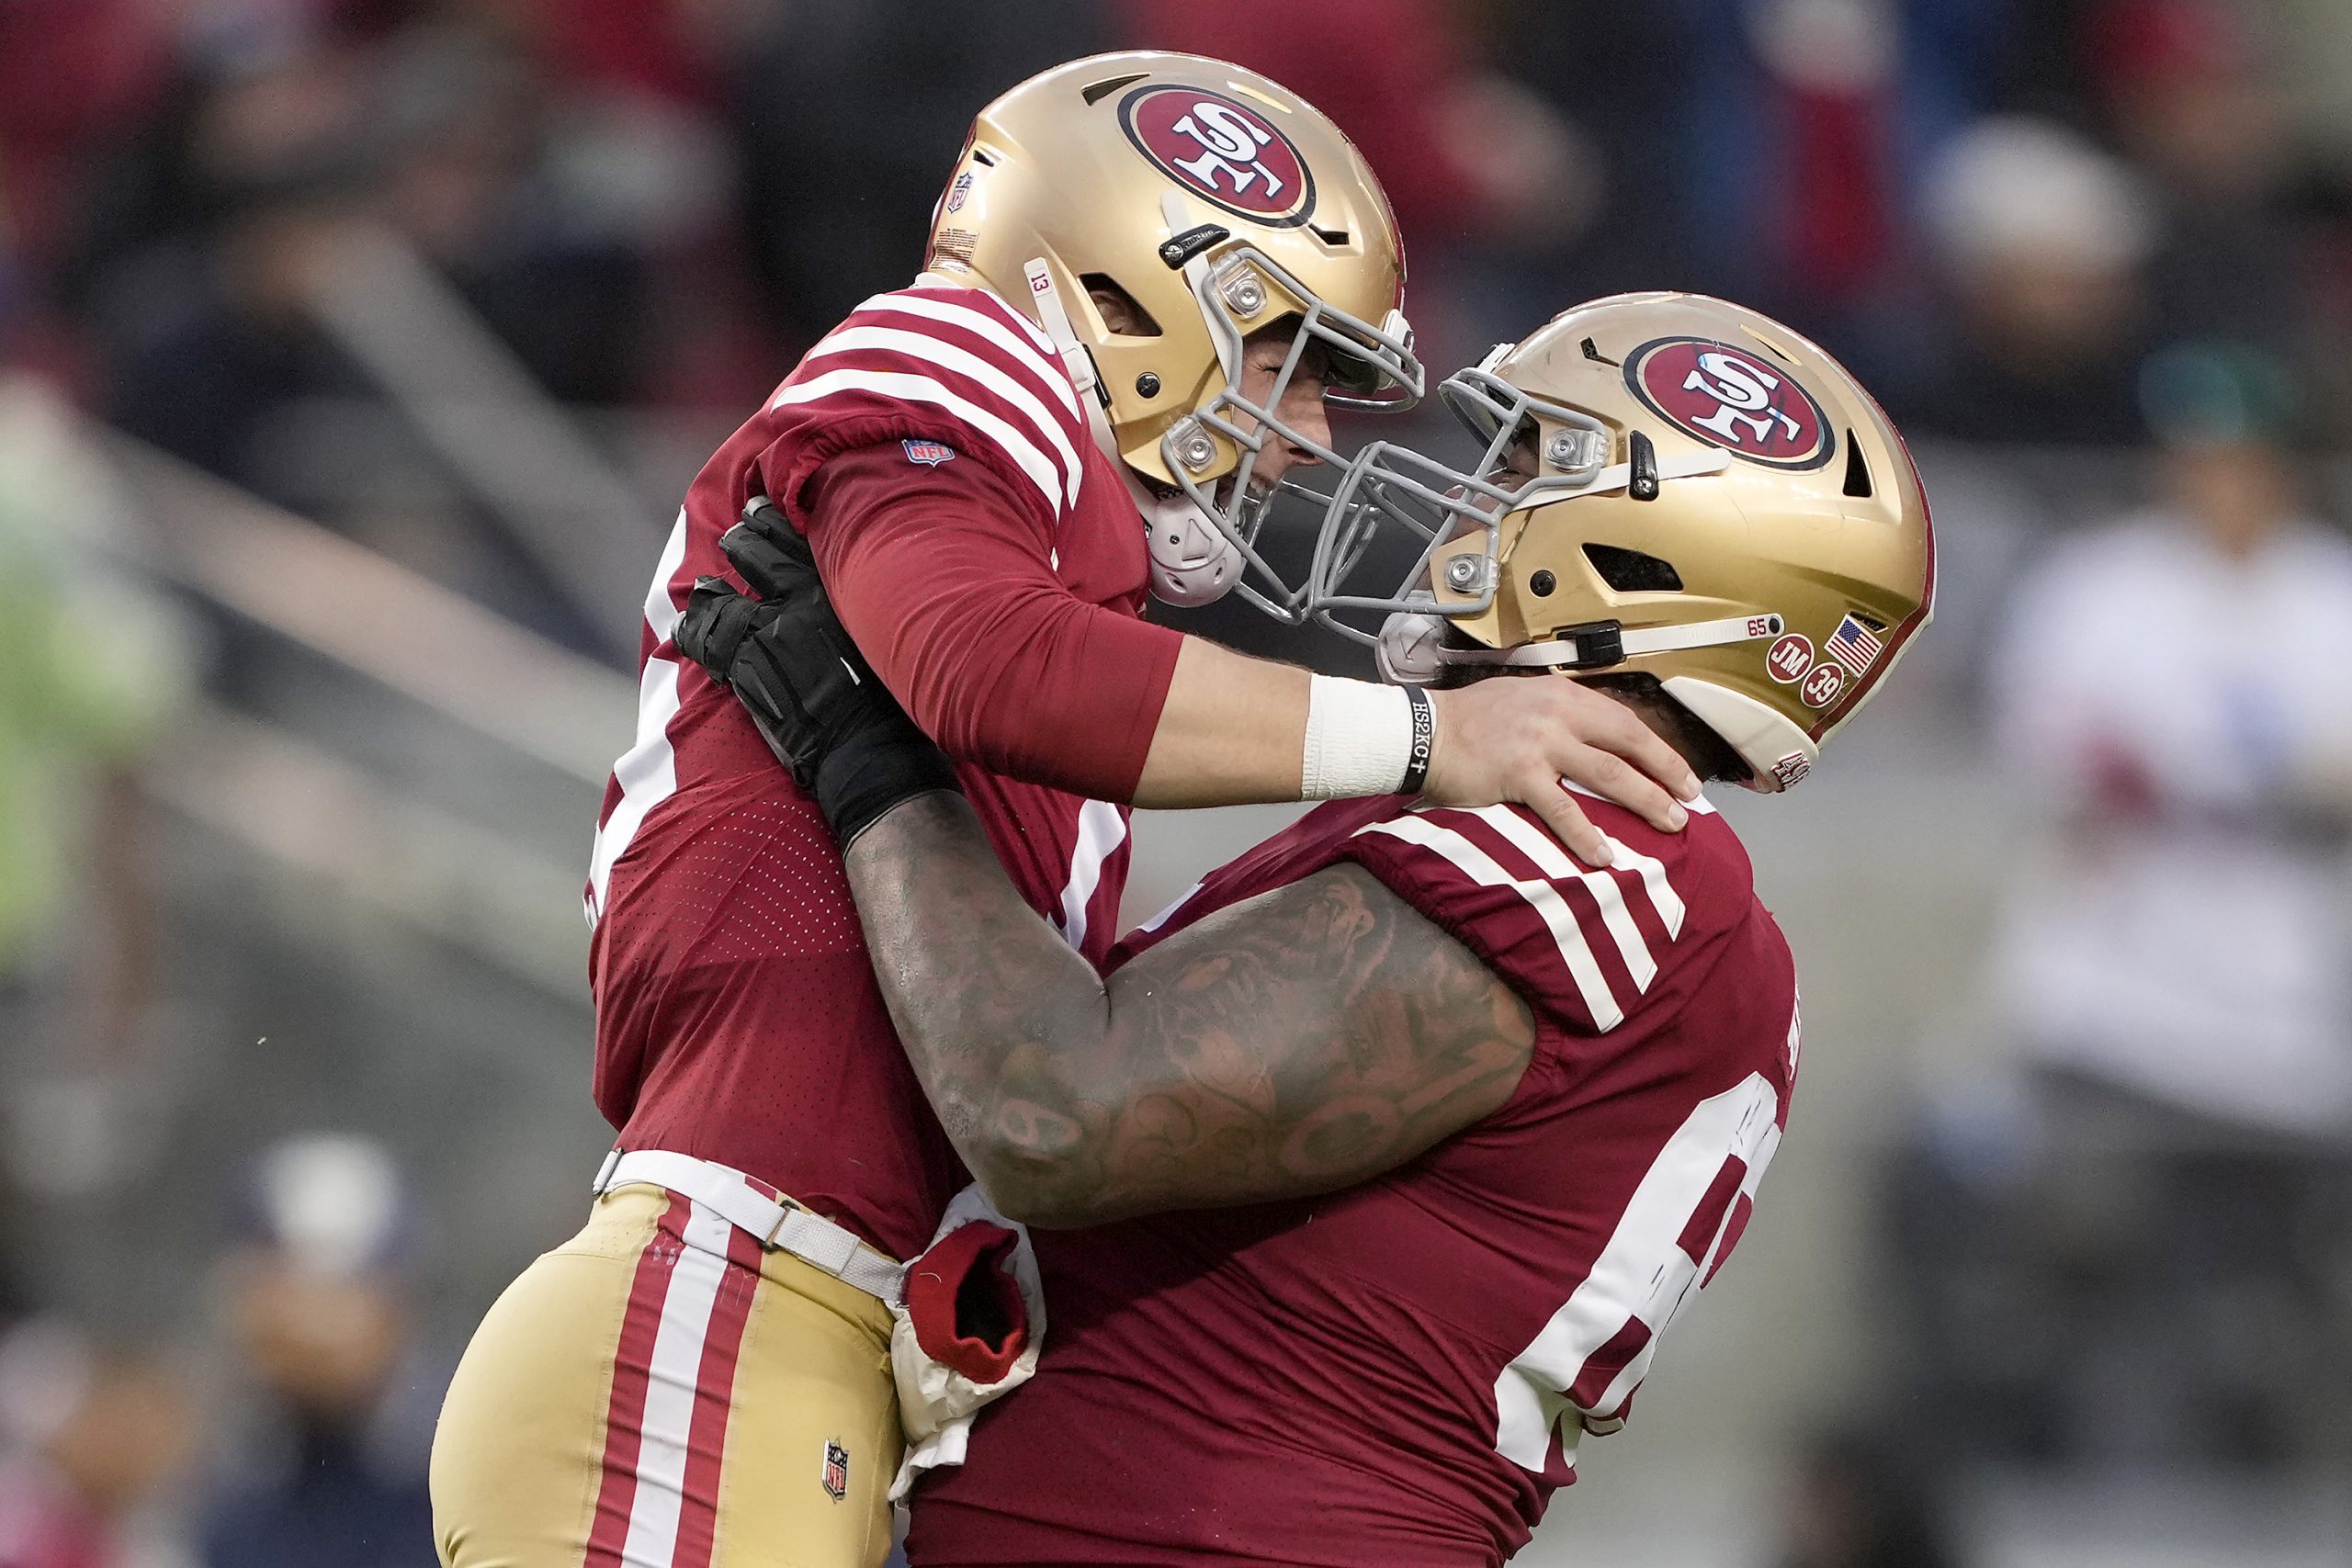 49ers dominate Seahawks in second half to win 41-23 in Wild Card